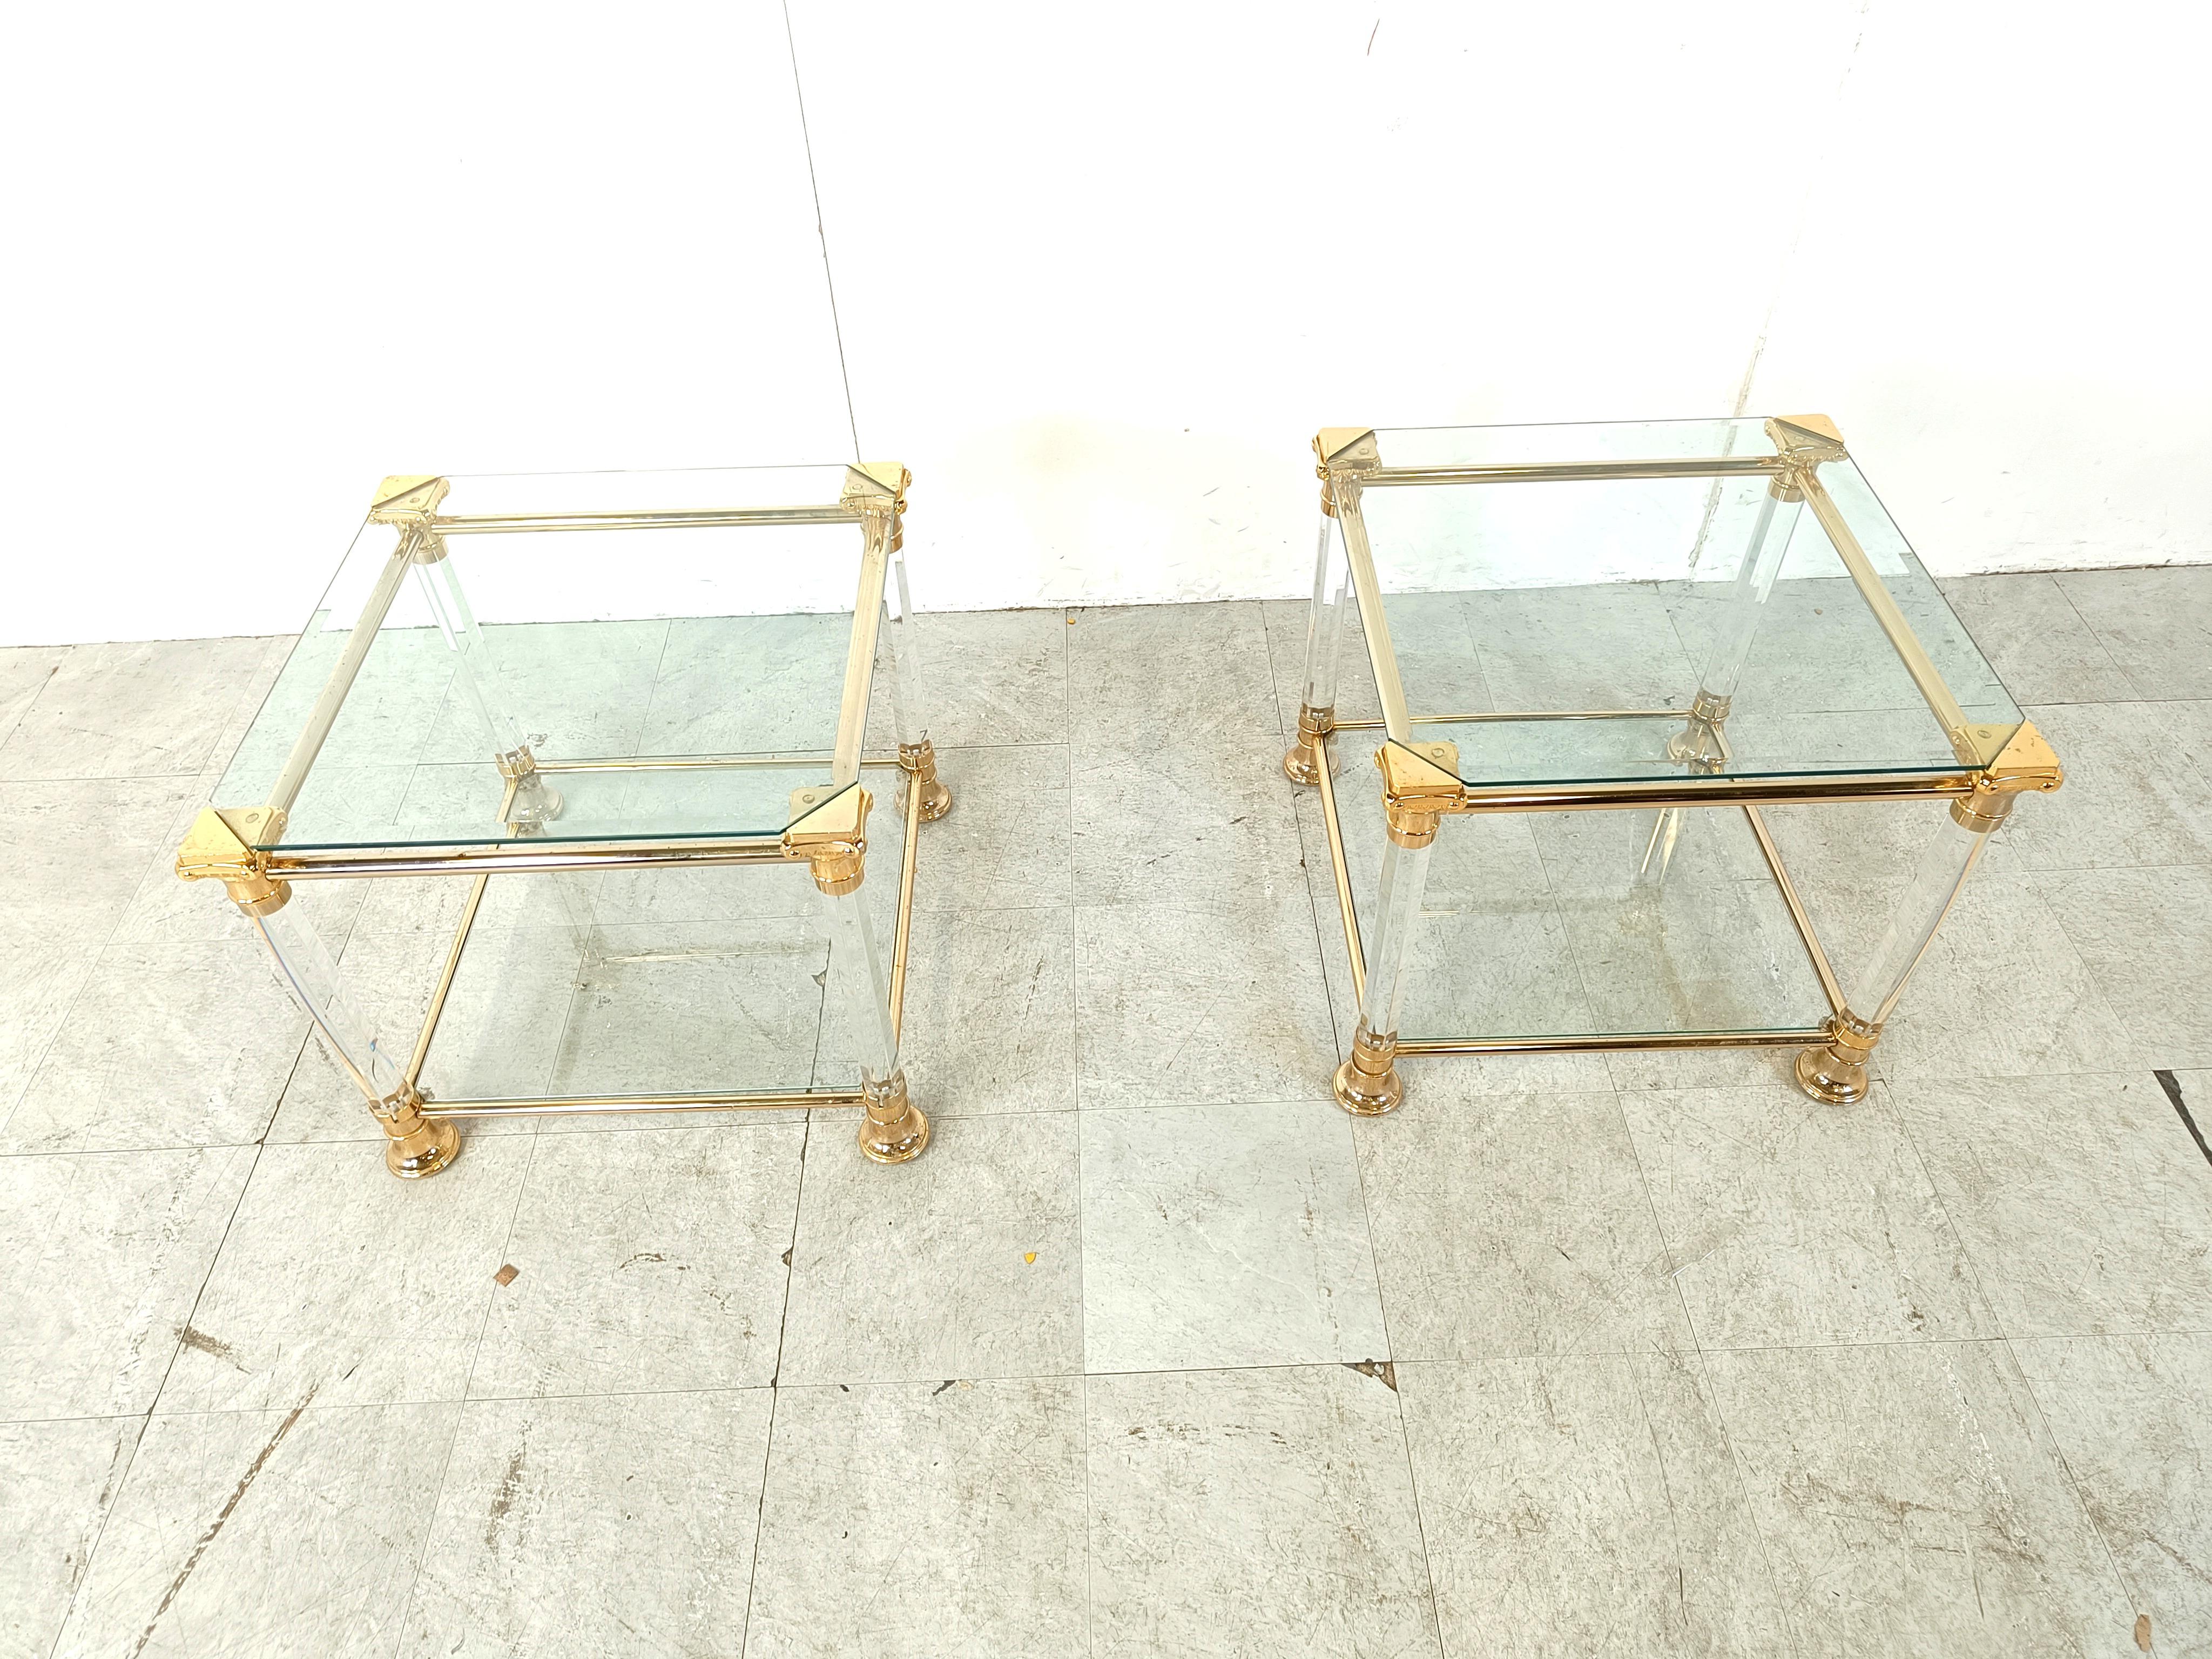 Gorgeous pair of lucite and brass column side tables with  clear glass tops.

Good overall condition.

1980s - Belgium

Dimensions:

Height: 50cm
Width: 60cm
Depth: 60cm

Ref.: 312242

*Price is for the pair 